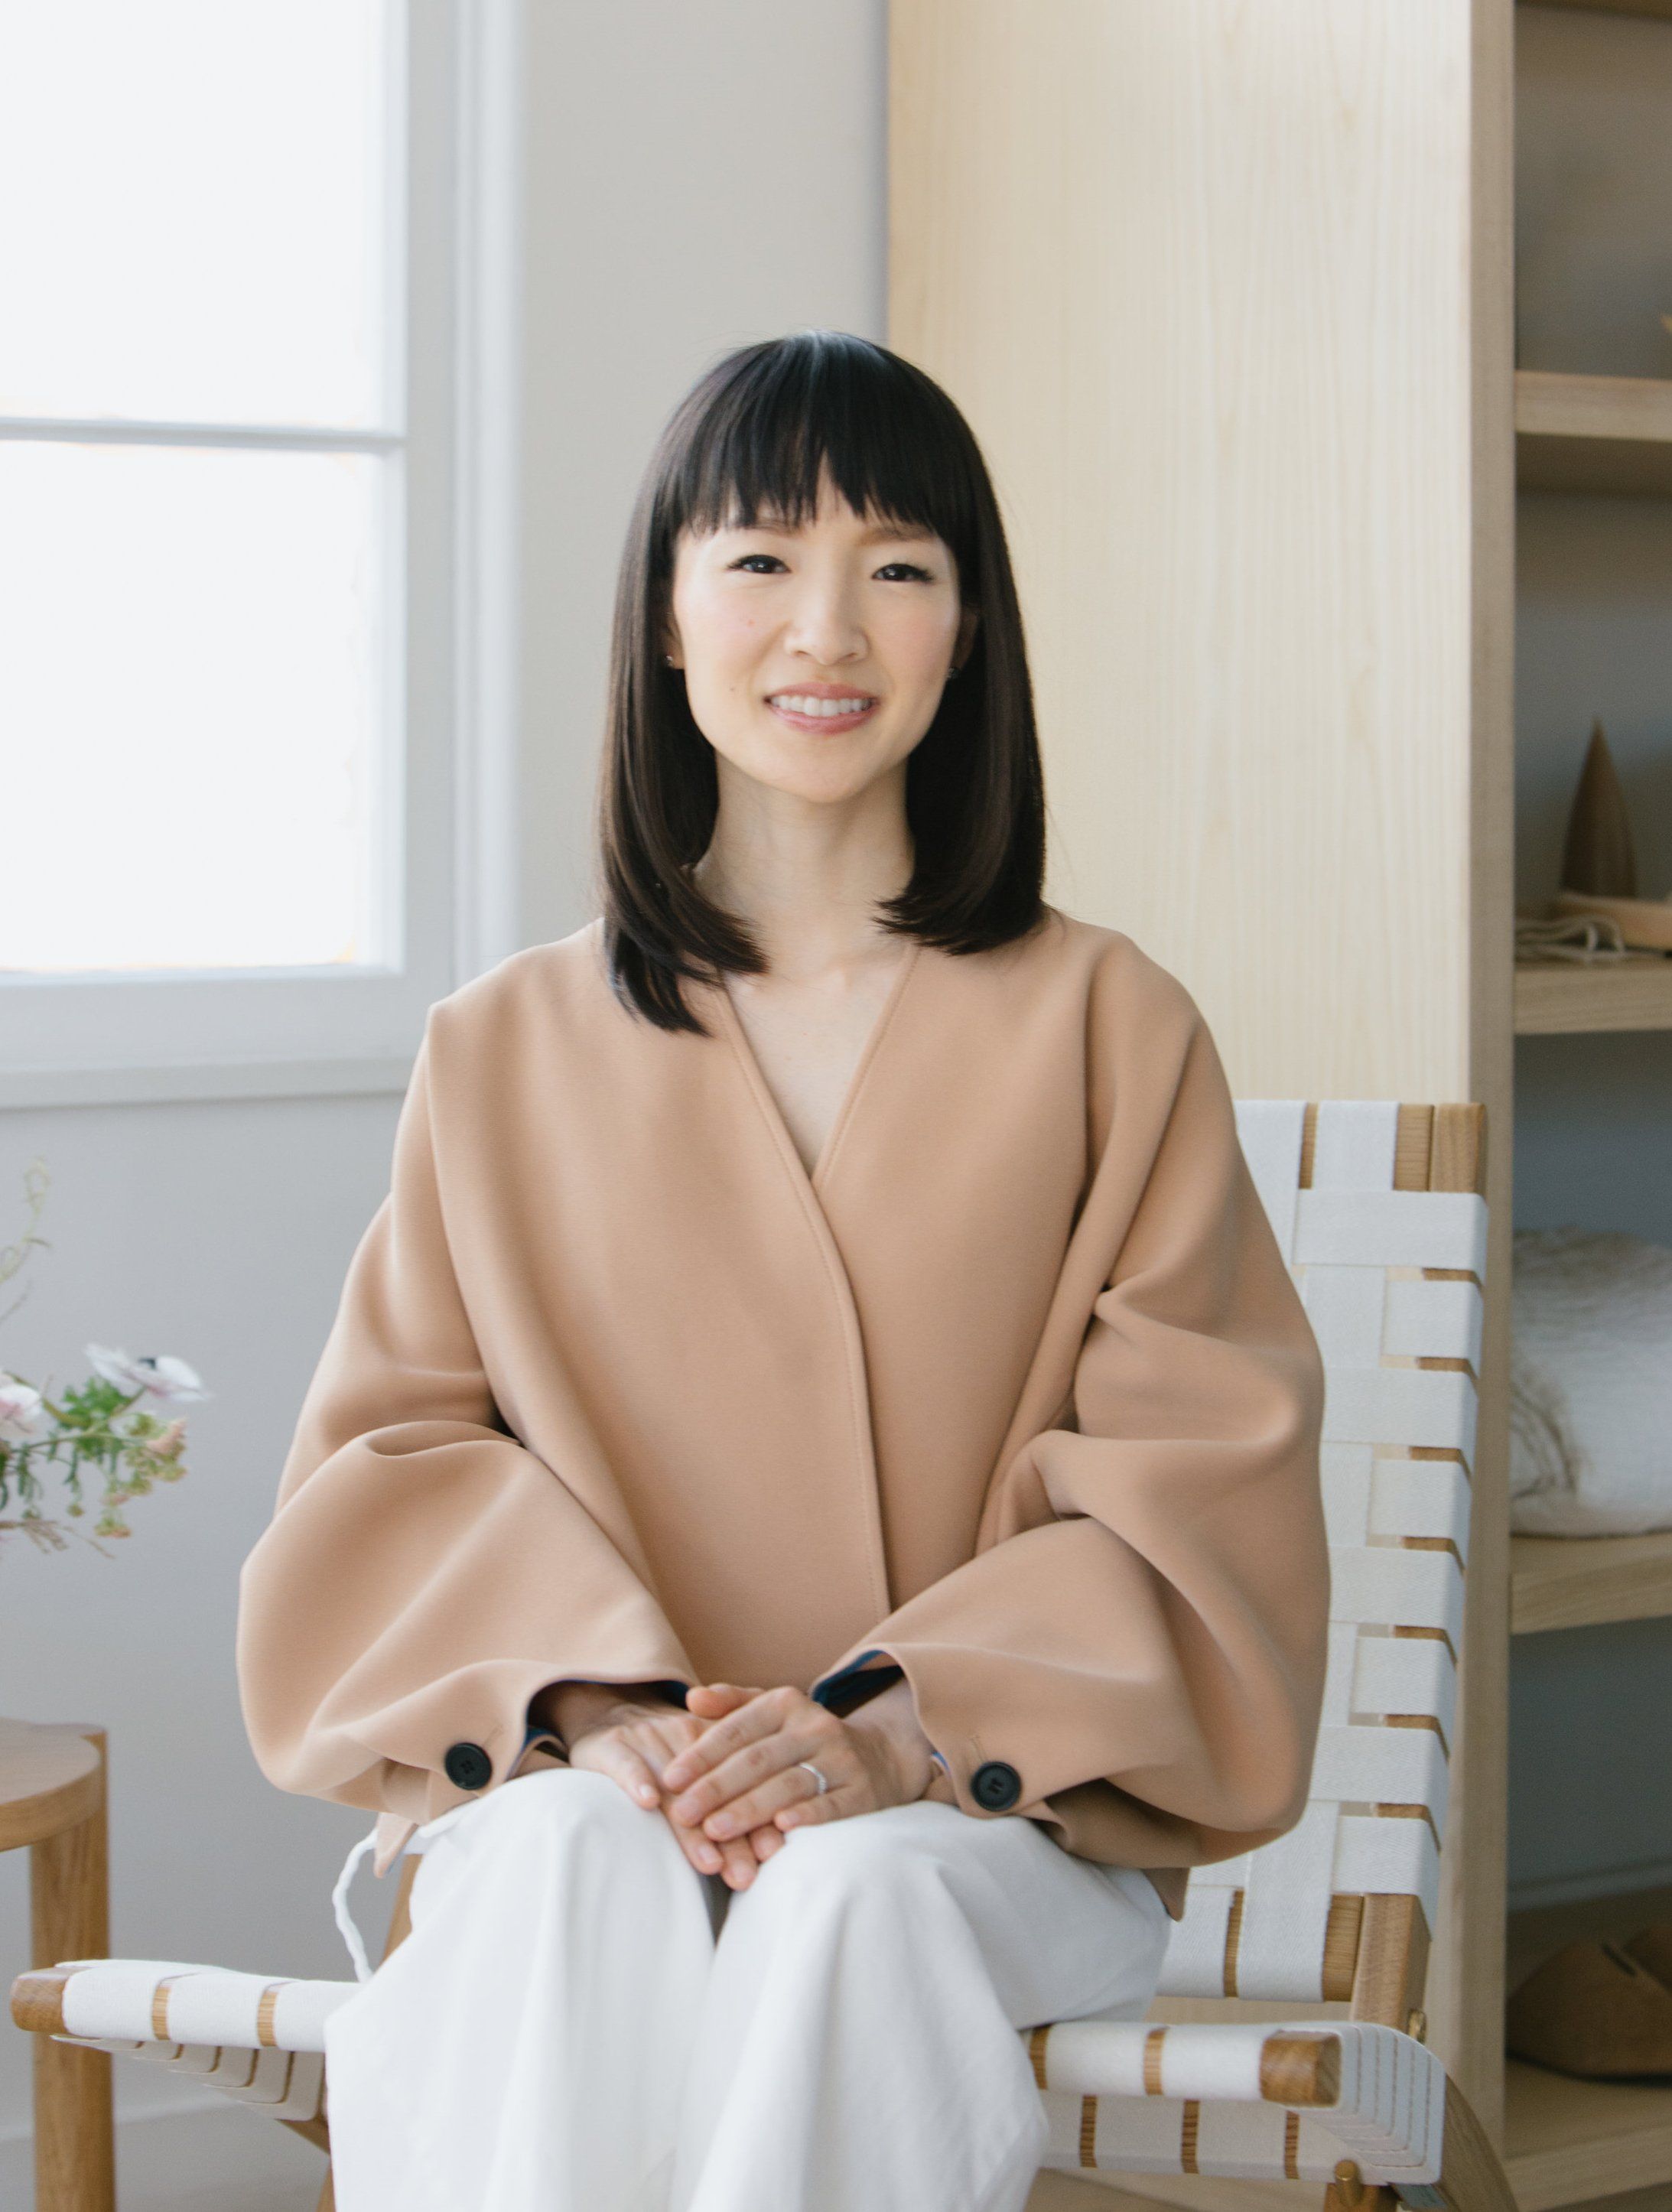 The Best of Marie Kondo: Organizing for Real Life - The Design Twins